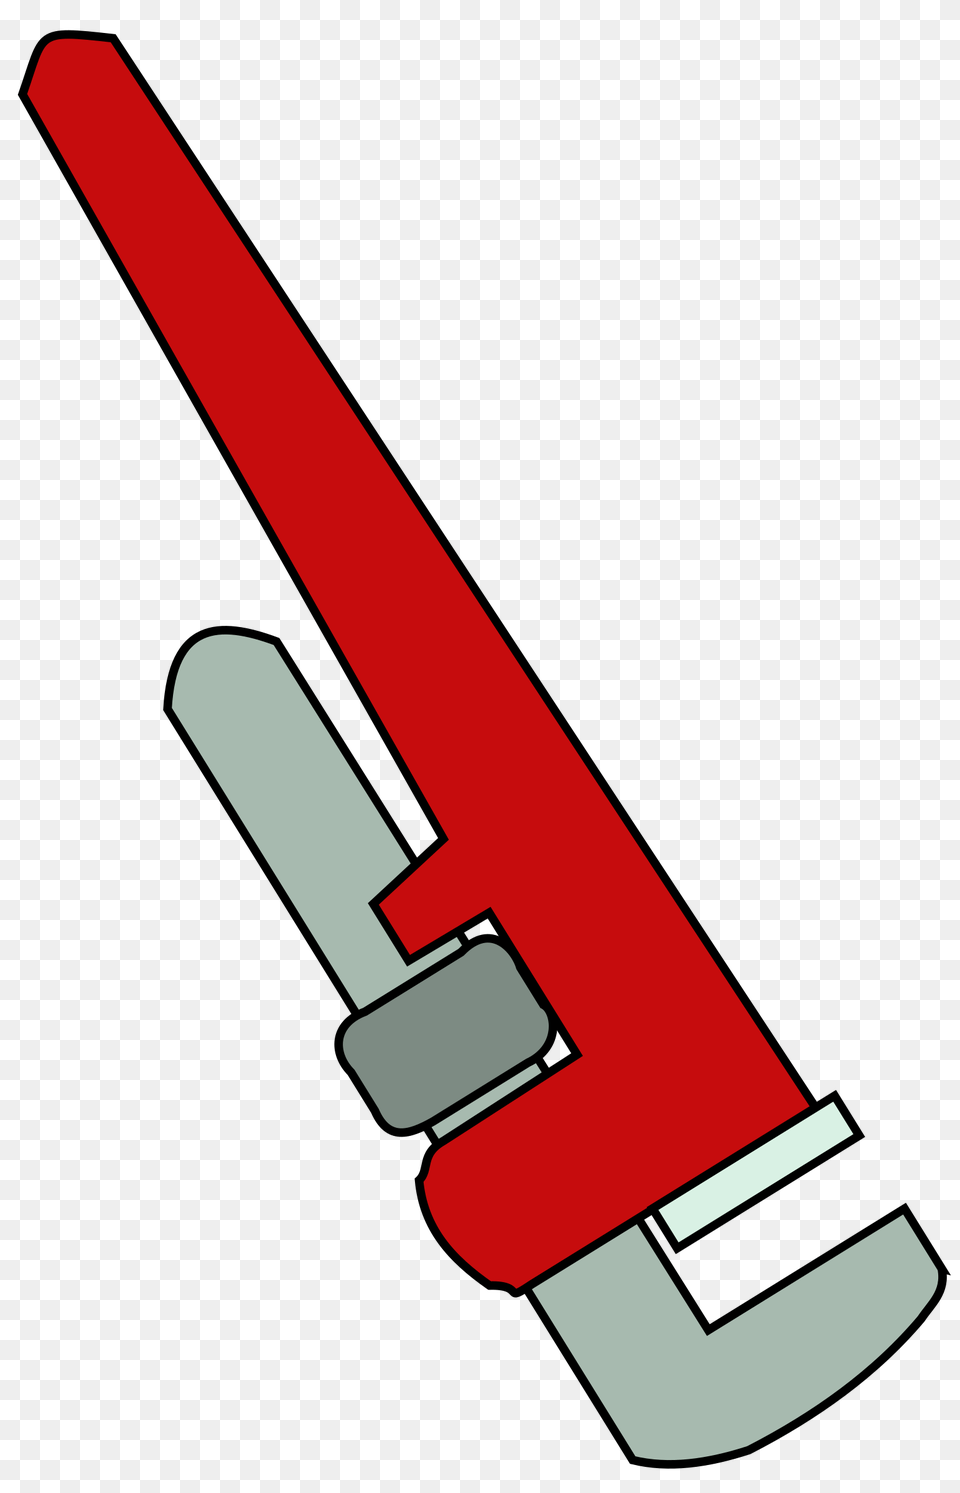 Pipe Wrench Png